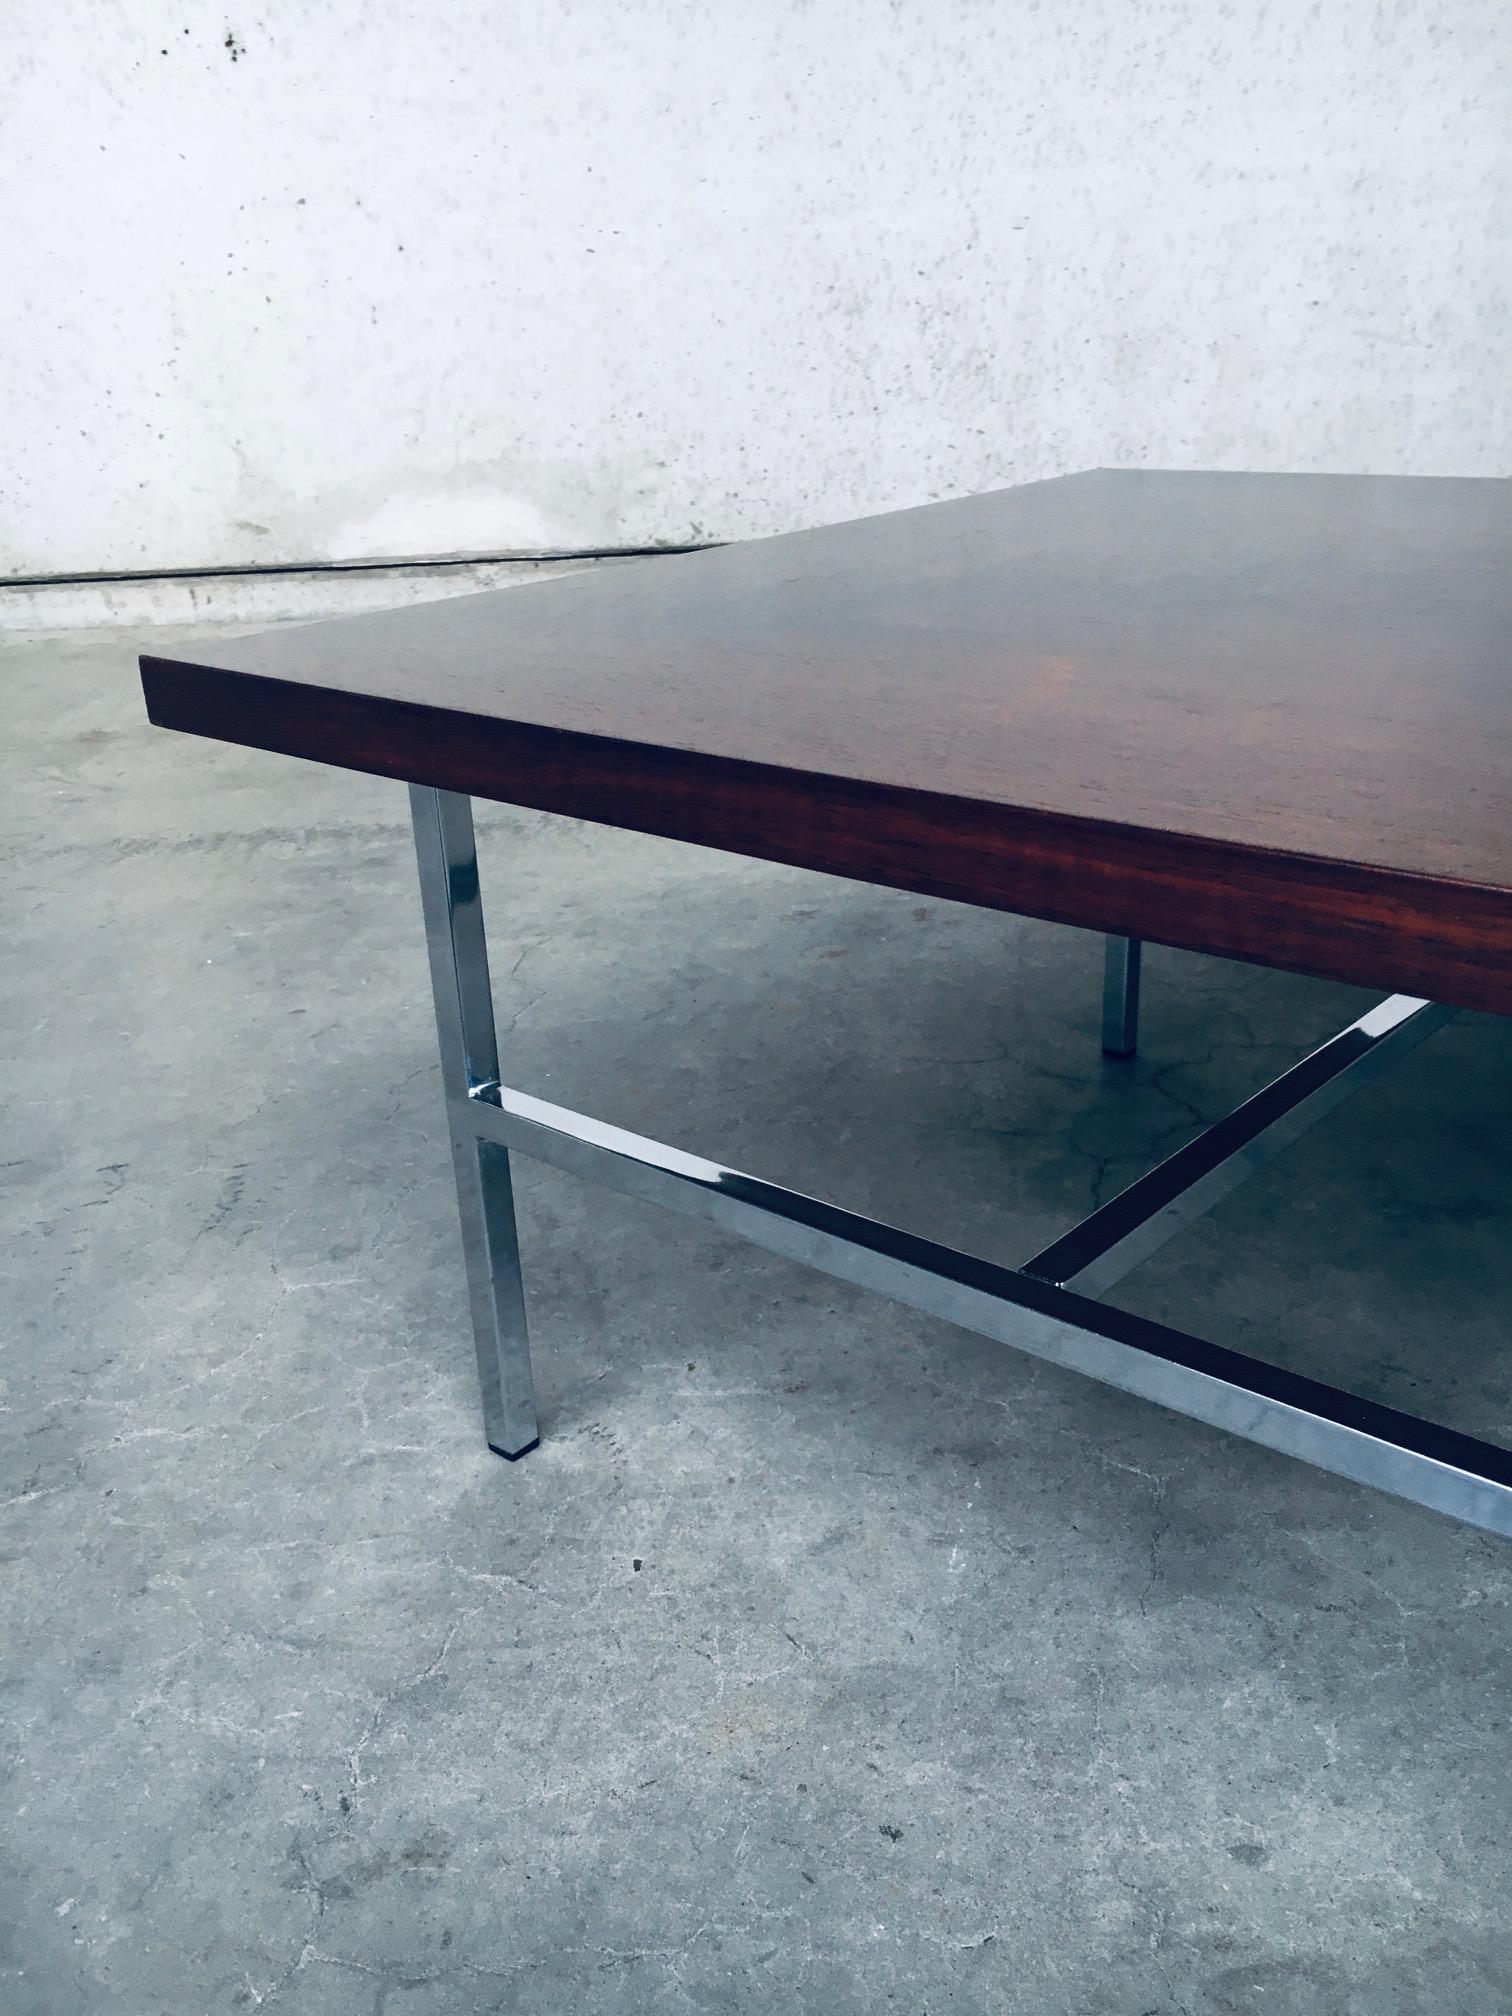 Midcentury Dutch Design Coffee Table, Netherlands 1960's For Sale 6